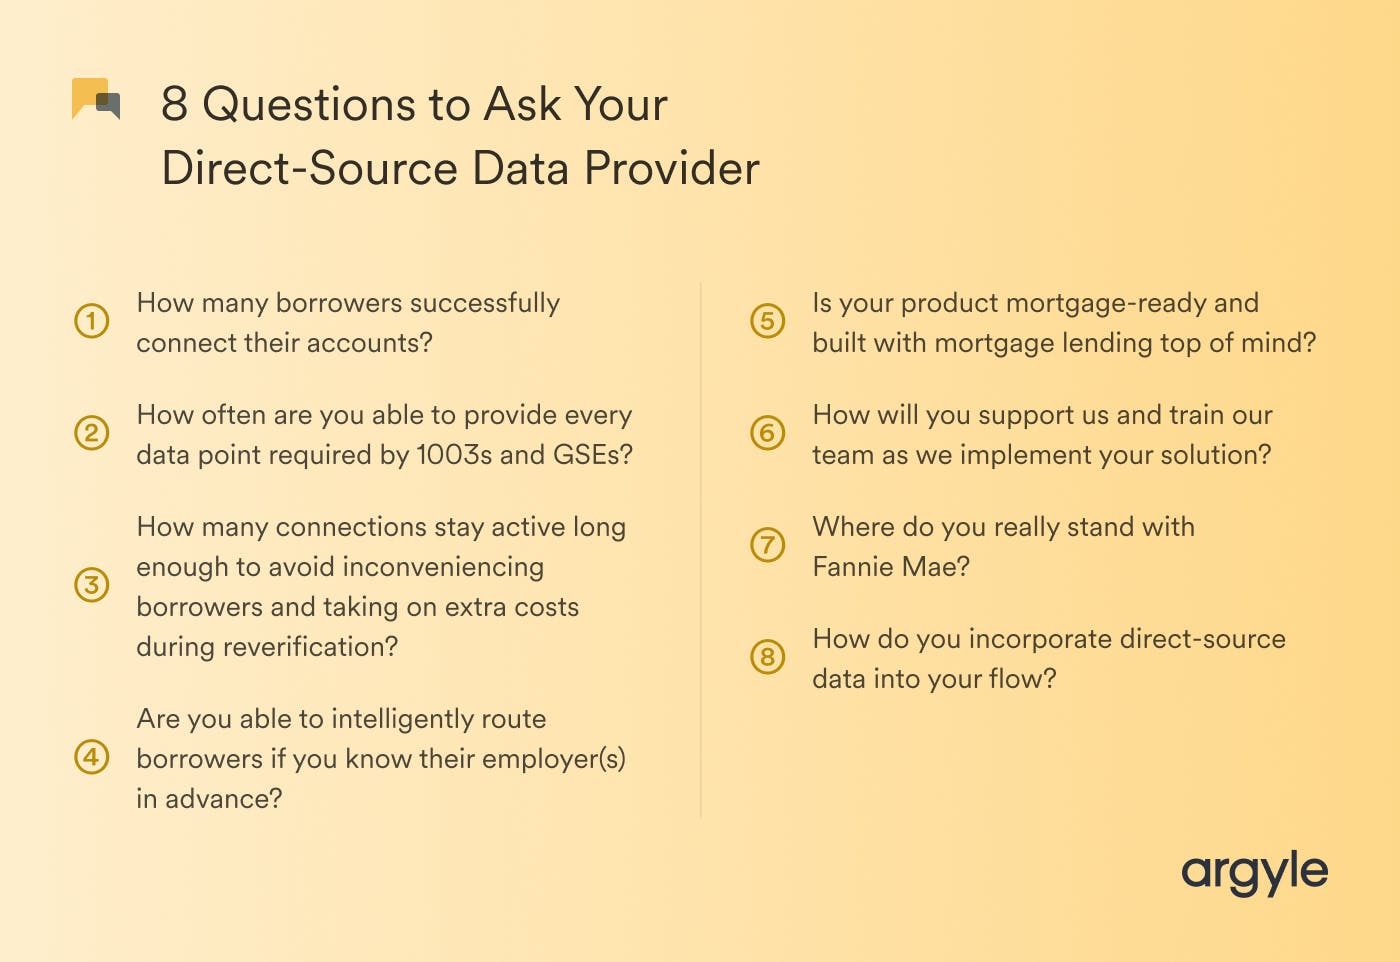 8 Questions to Ask Your Direct-Source Data Provider